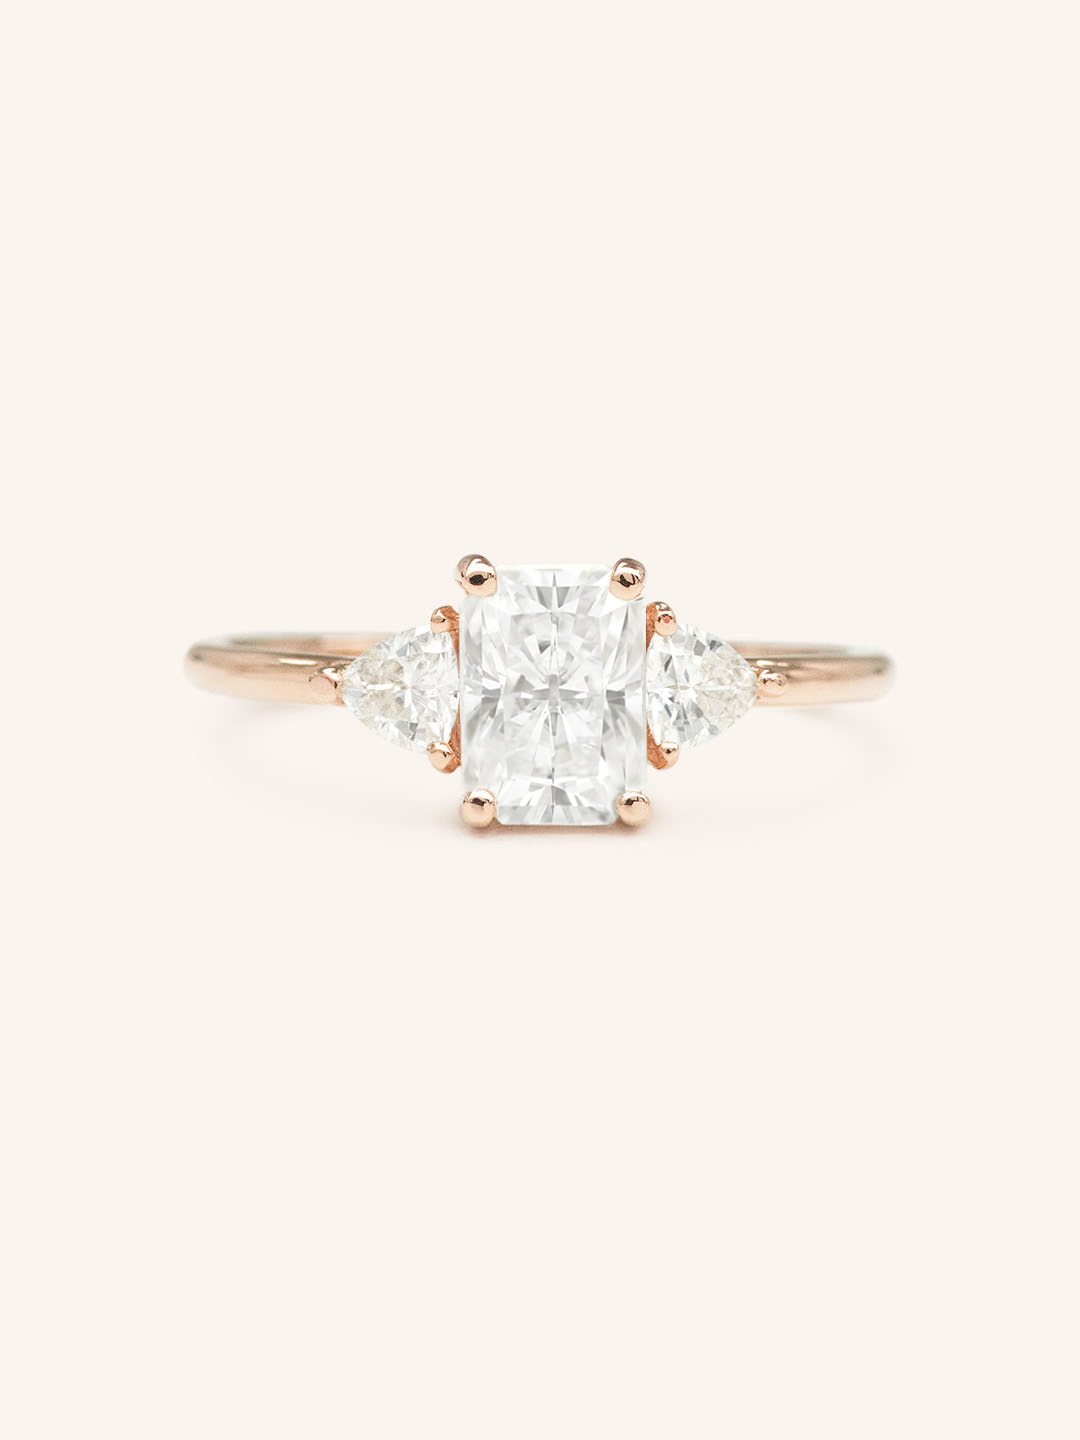 Winter Triangle Radiant Cut Moissanite Three Stone Engagement Ring